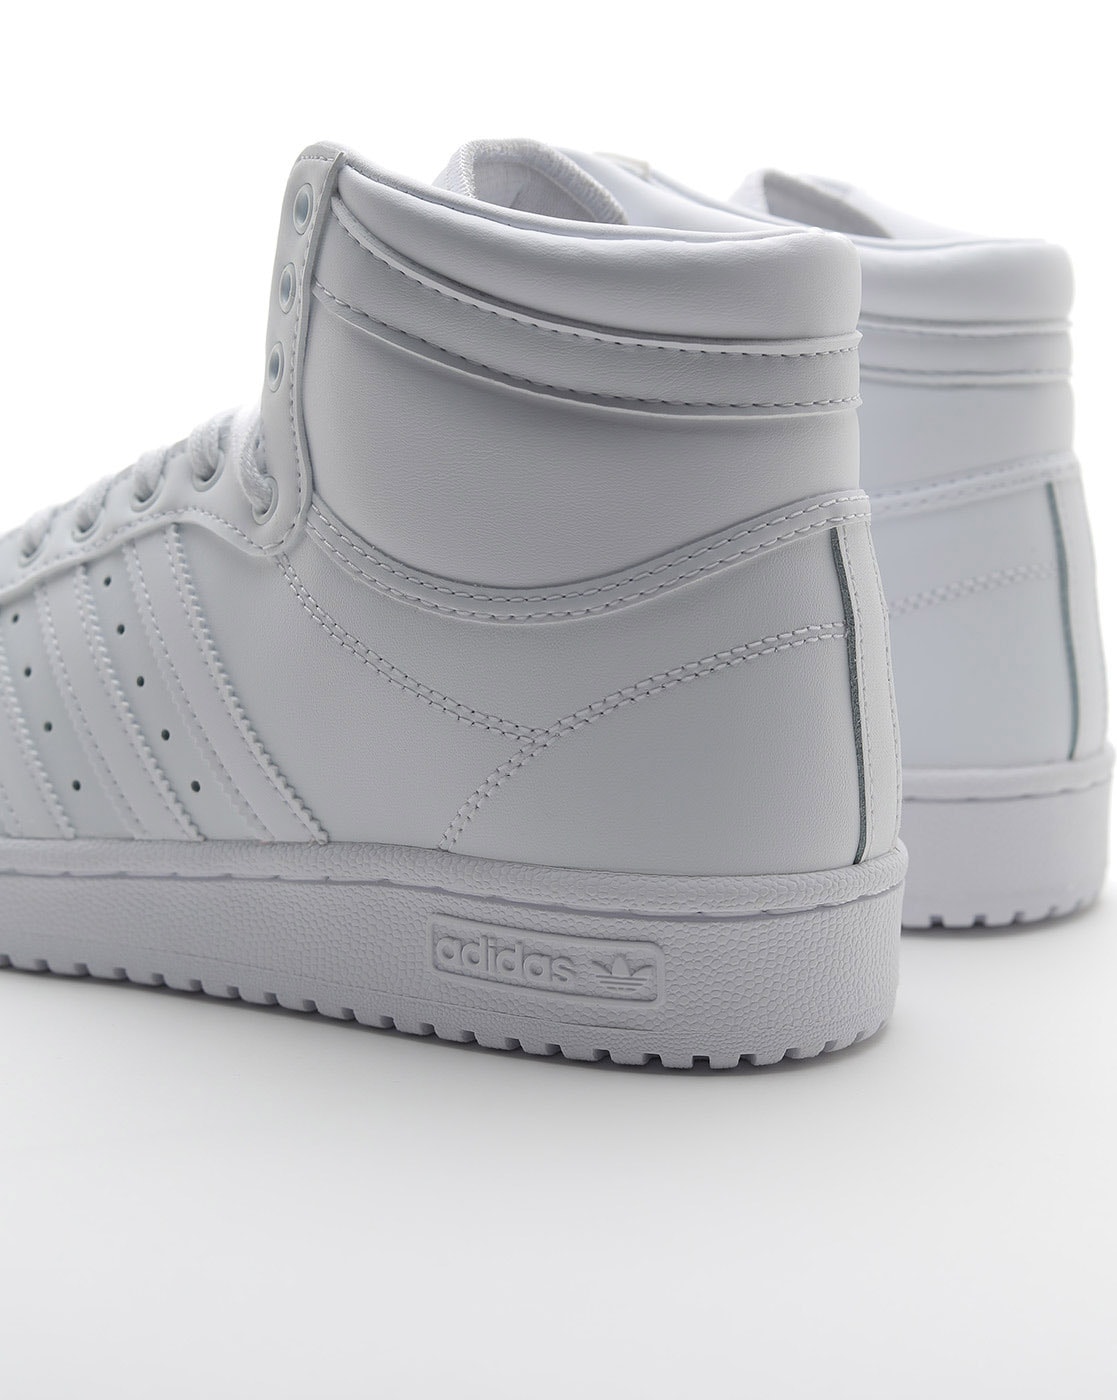 White Adidas High Ankle Shoes | vlr.eng.br